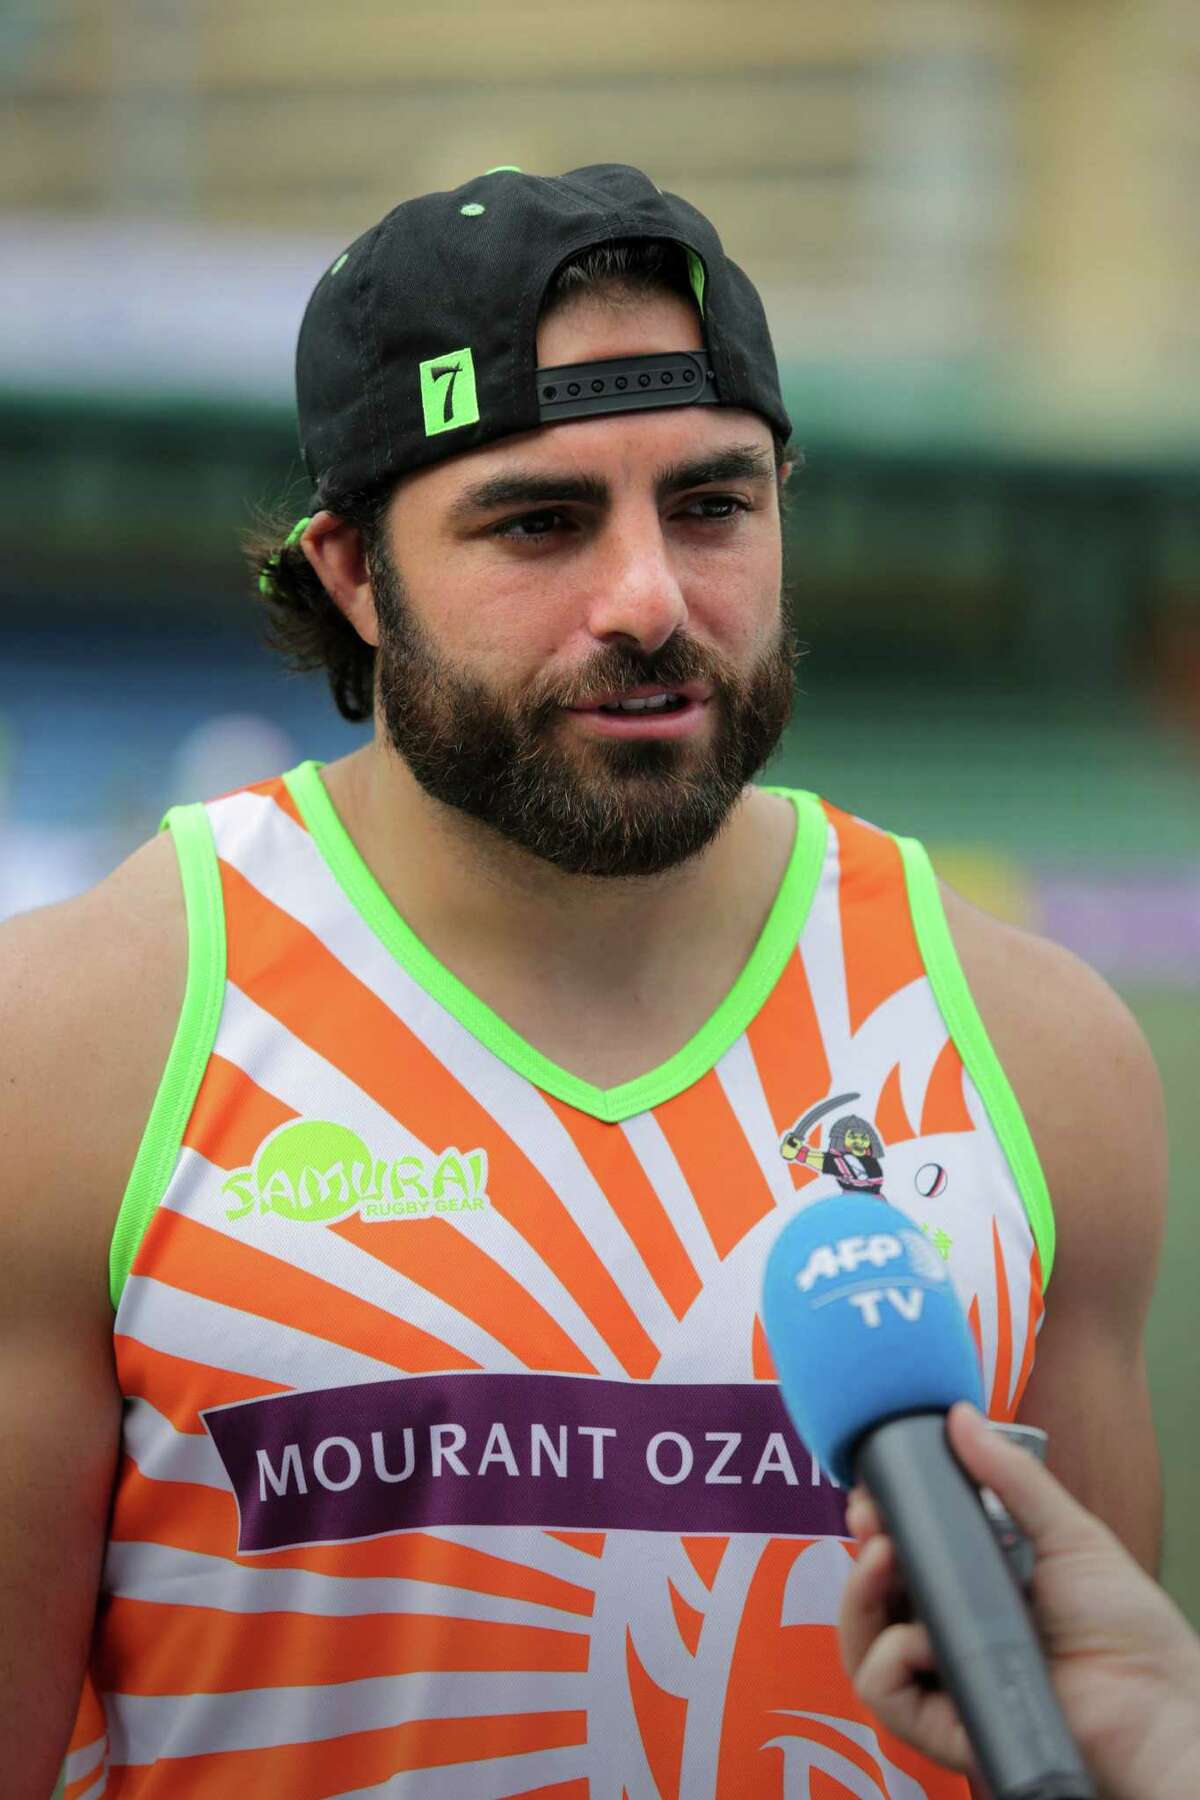 NFL player Nate Ebner shining in early Olympic efforts for U.S. rugby team